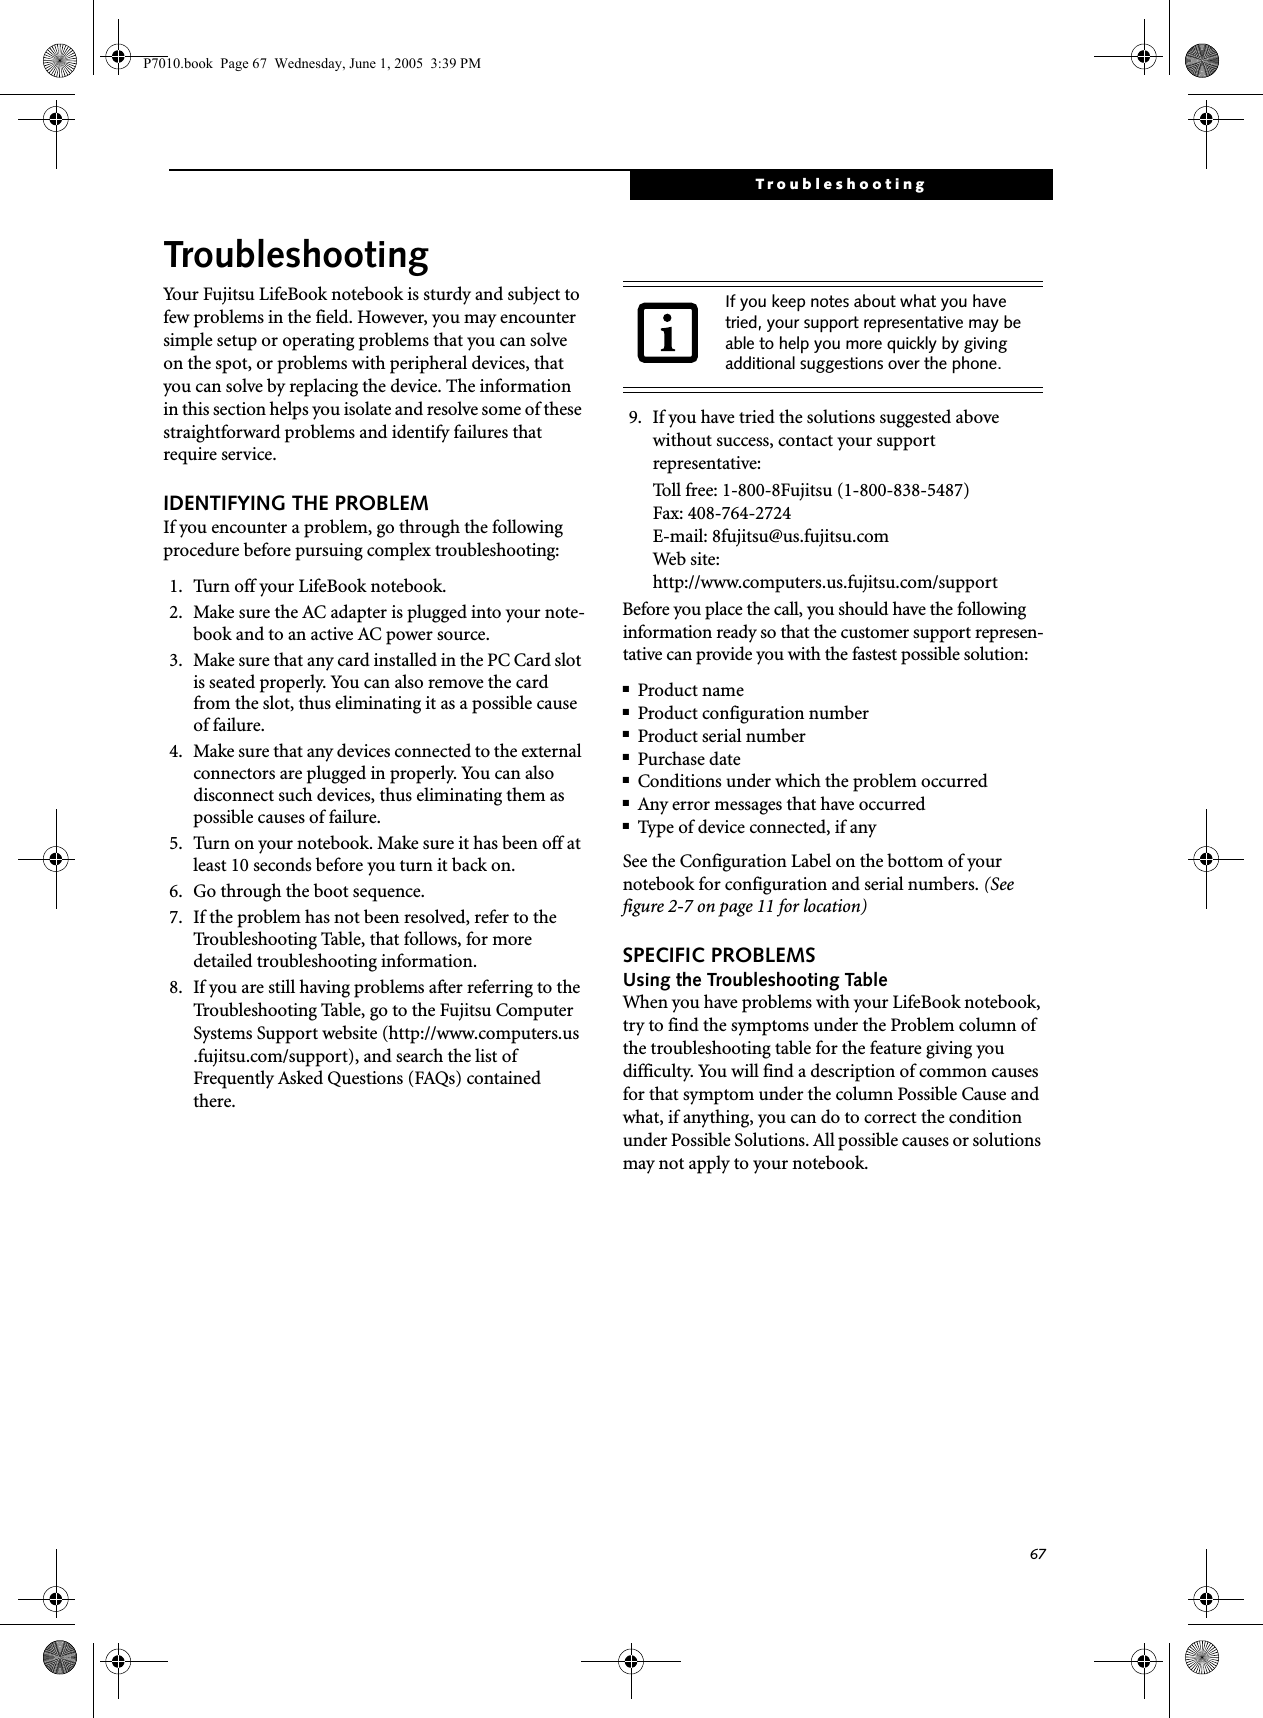 67TroubleshootingTroubleshootingYour Fujitsu LifeBook notebook is sturdy and subject to few problems in the field. However, you may encounter simple setup or operating problems that you can solve on the spot, or problems with peripheral devices, that you can solve by replacing the device. The information in this section helps you isolate and resolve some of these straightforward problems and identify failures that require service.IDENTIFYING THE PROBLEMIf you encounter a problem, go through the following procedure before pursuing complex troubleshooting:1. Turn off your LifeBook notebook.2. Make sure the AC adapter is plugged into your note-book and to an active AC power source.3. Make sure that any card installed in the PC Card slot is seated properly. You can also remove the card from the slot, thus eliminating it as a possible cause of failure.4. Make sure that any devices connected to the external connectors are plugged in properly. You can also disconnect such devices, thus eliminating them as possible causes of failure.5. Turn on your notebook. Make sure it has been off at least 10 seconds before you turn it back on.6. Go through the boot sequence.7. If the problem has not been resolved, refer to the Troubleshooting Table, that follows, for more detailed troubleshooting information. 8. If you are still having problems after referring to the Troubleshooting Table, go to the Fujitsu Computer Systems Support website (http://www.computers.us.fujitsu.com/support), and search the list of Frequently Asked Questions (FAQs) contained there. 9. If you have tried the solutions suggested above without success, contact your support representative: Toll free: 1-800-8Fujitsu (1-800-838-5487) Fax: 408-764-2724 E-mail: 8fujitsu@us.fujitsu.com Web site: http://www.computers.us.fujitsu.com/supportBefore you place the call, you should have the following information ready so that the customer support represen-tative can provide you with the fastest possible solution:■Product name■Product configuration number■Product serial number■Purchase date■Conditions under which the problem occurred■Any error messages that have occurred■Type of device connected, if anySee the Configuration Label on the bottom of yournotebook for configuration and serial numbers. (See figure 2-7 on page 11 for location)SPECIFIC PROBLEMSUsing the Troubleshooting TableWhen you have problems with your LifeBook notebook, try to find the symptoms under the Problem column of the troubleshooting table for the feature giving you difficulty. You will find a description of common causes for that symptom under the column Possible Cause and what, if anything, you can do to correct the condition under Possible Solutions. All possible causes or solutions may not apply to your notebook.If you keep notes about what you have tried, your support representative may be able to help you more quickly by giving additional suggestions over the phone.P7010.book  Page 67  Wednesday, June 1, 2005  3:39 PM